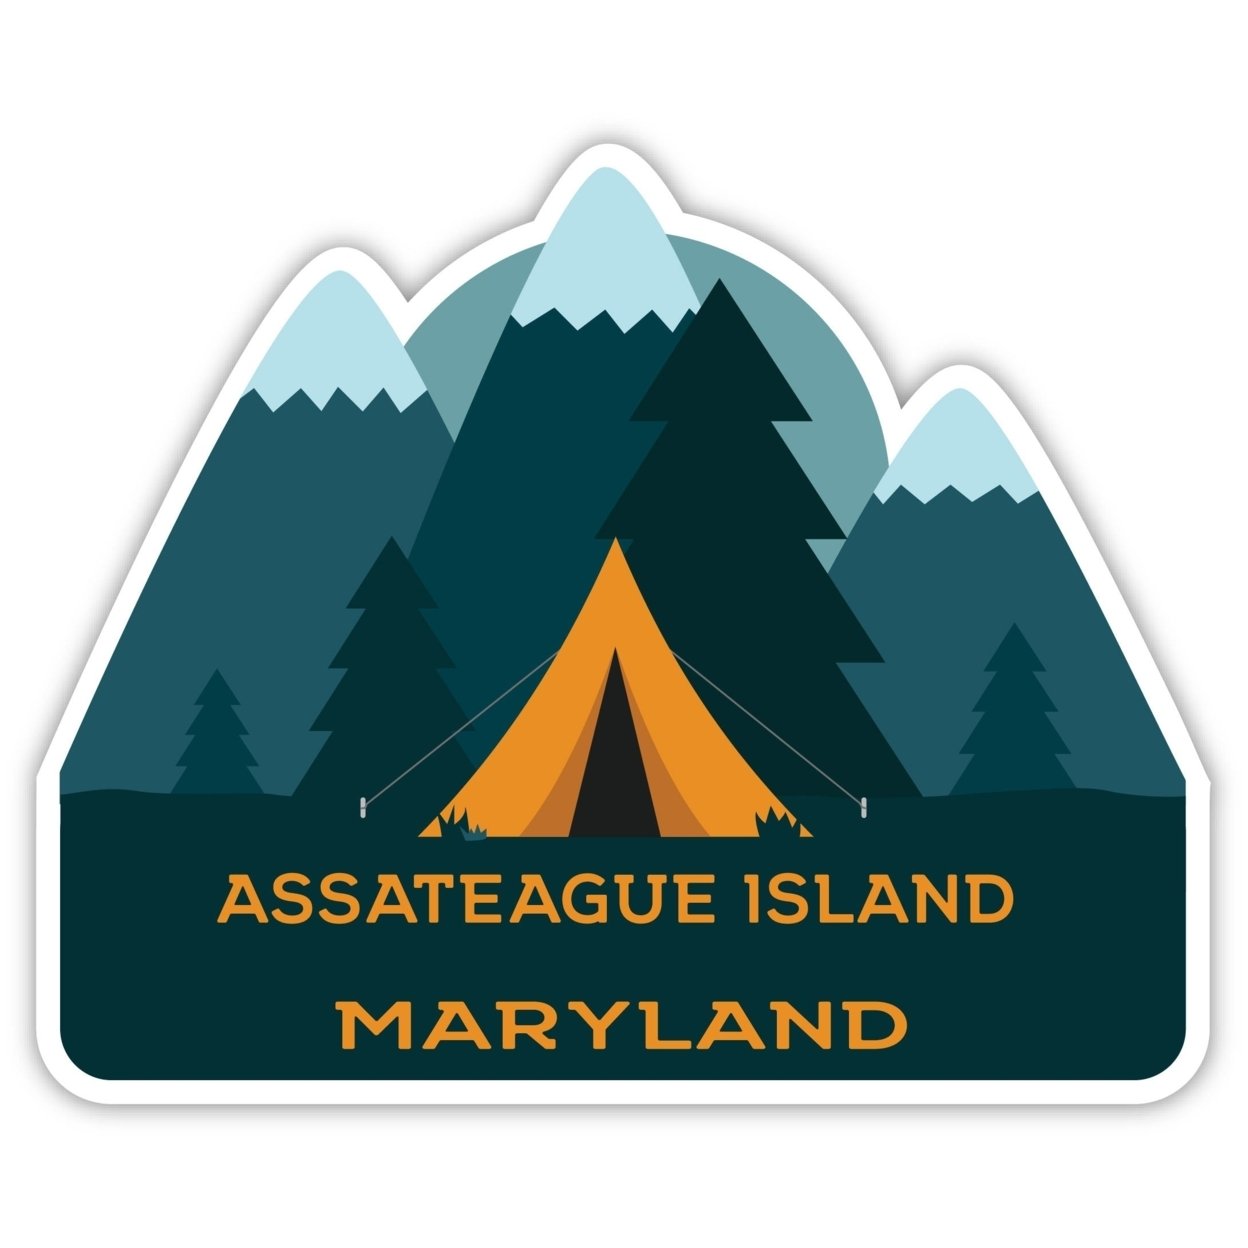 Assateague Island Maryland Souvenir Decorative Stickers (Choose Theme And Size) - 4-Pack, 8-Inch, Tent